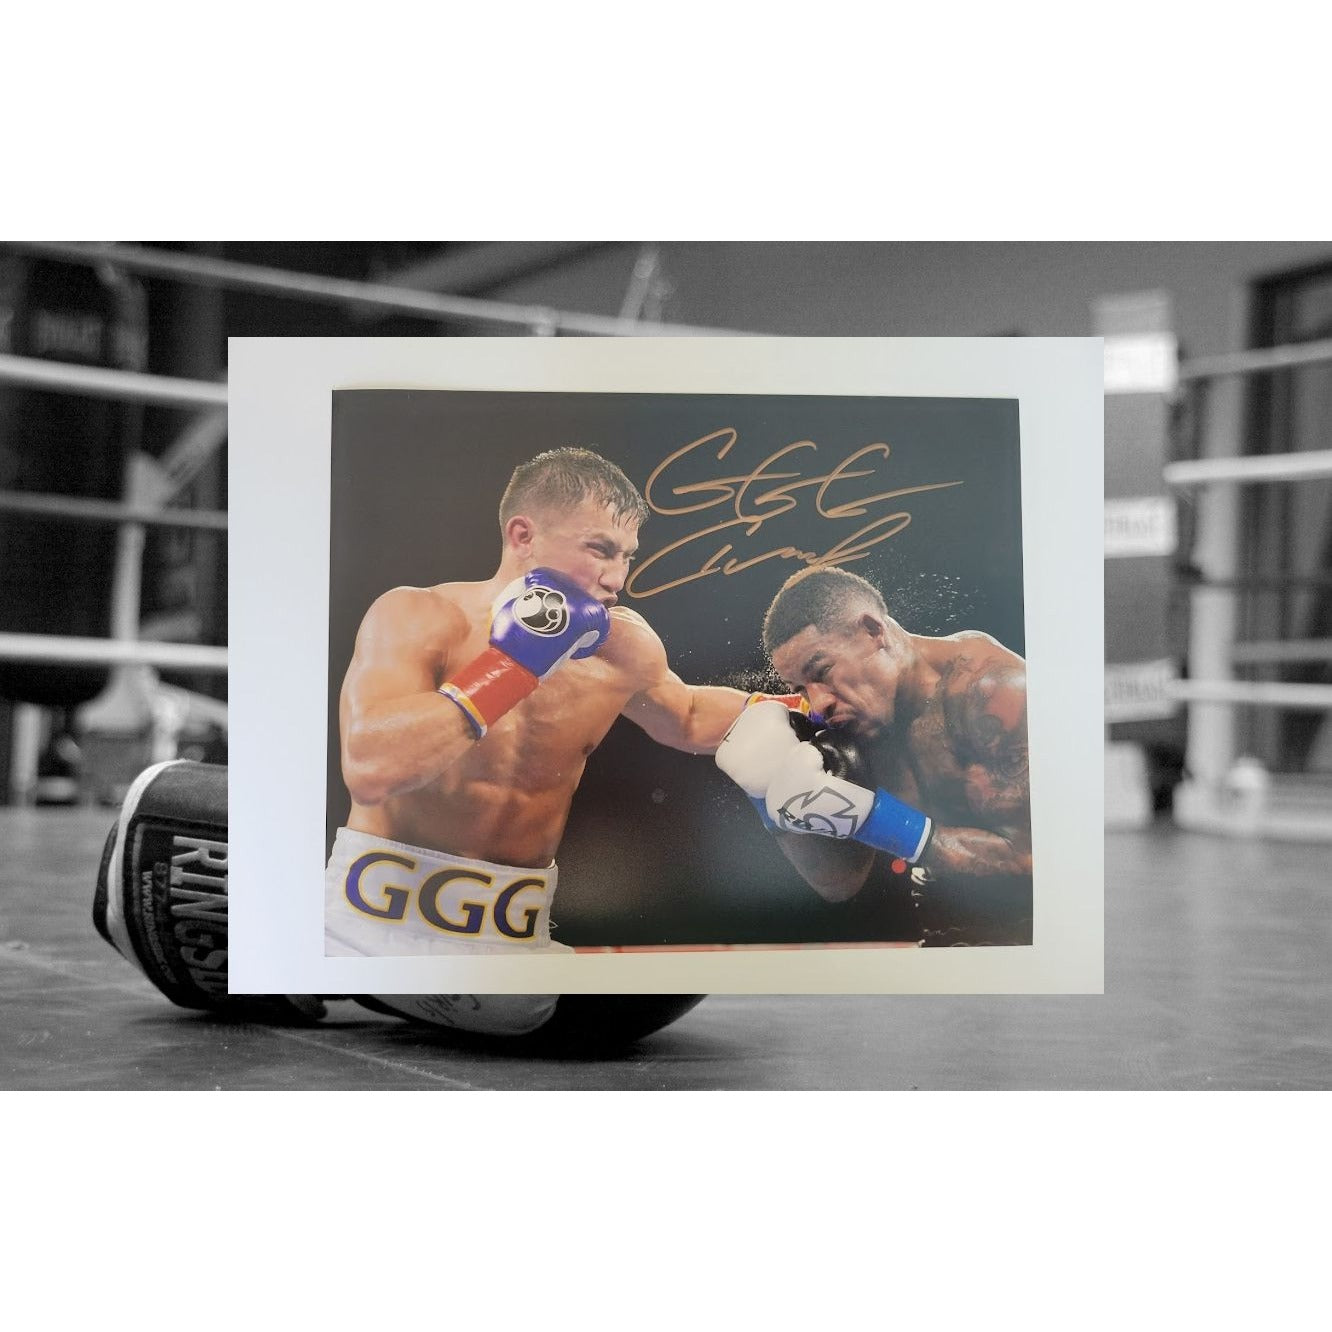 Triple G Gennady Golovkin 8 x 10 photo signed with proof